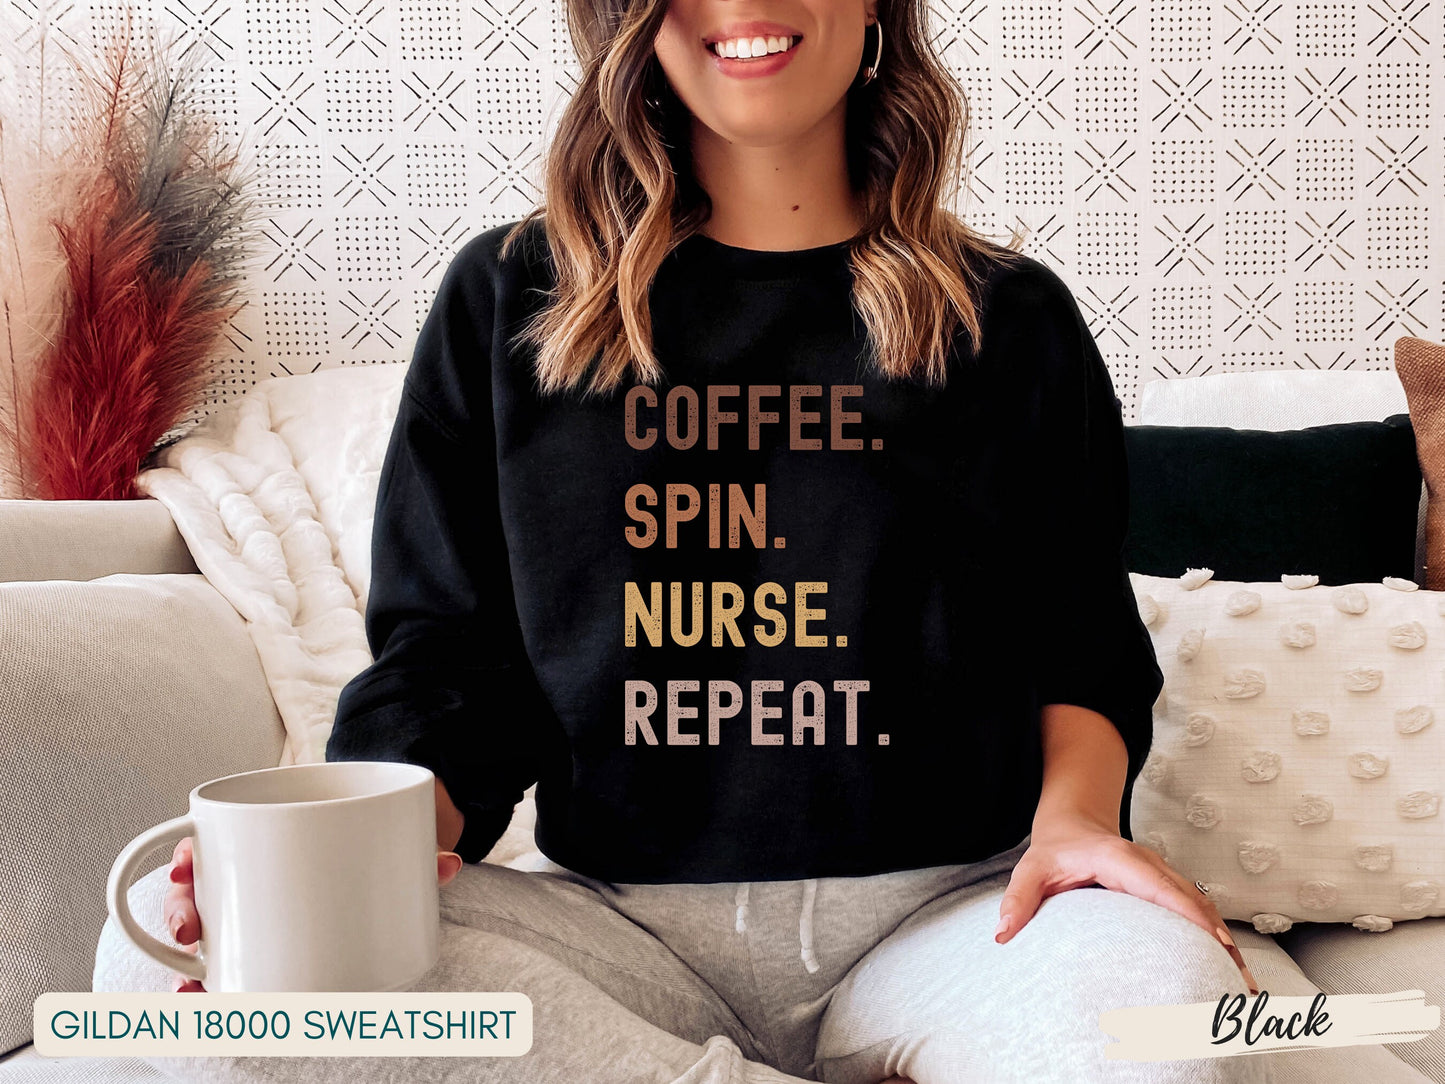 Coffee Spin Nurse Repeat Shirt - Grunge Fonted Retro Colors, Short Long Sweatshirt Style, Perfect for Nurses and Coffee Lovers